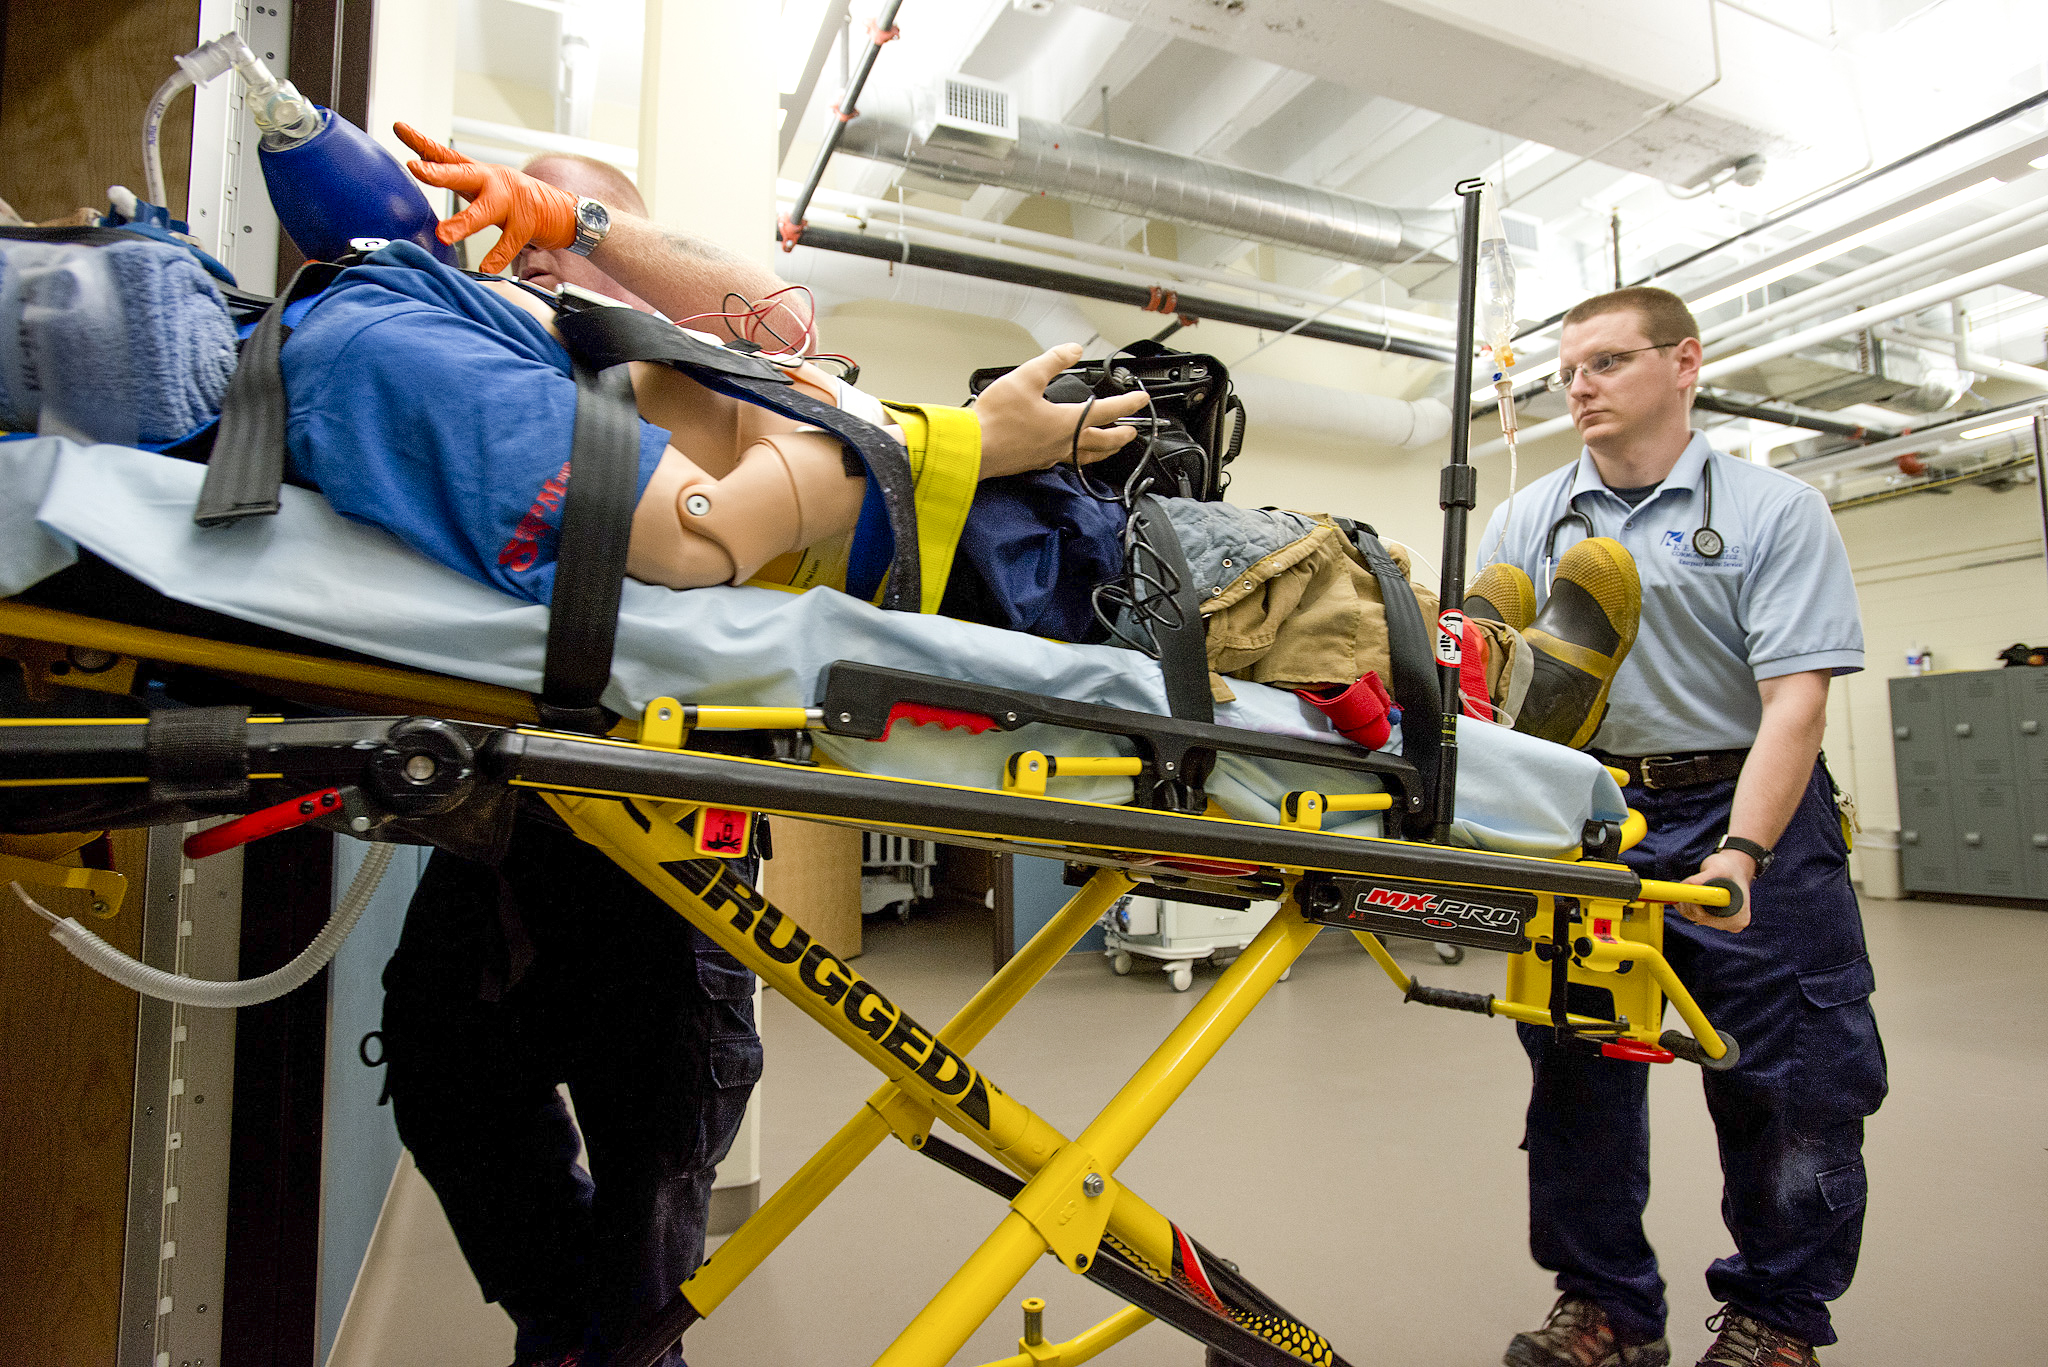 EMS students push a simulated patient on a gurney in the College's EMS sim lab.